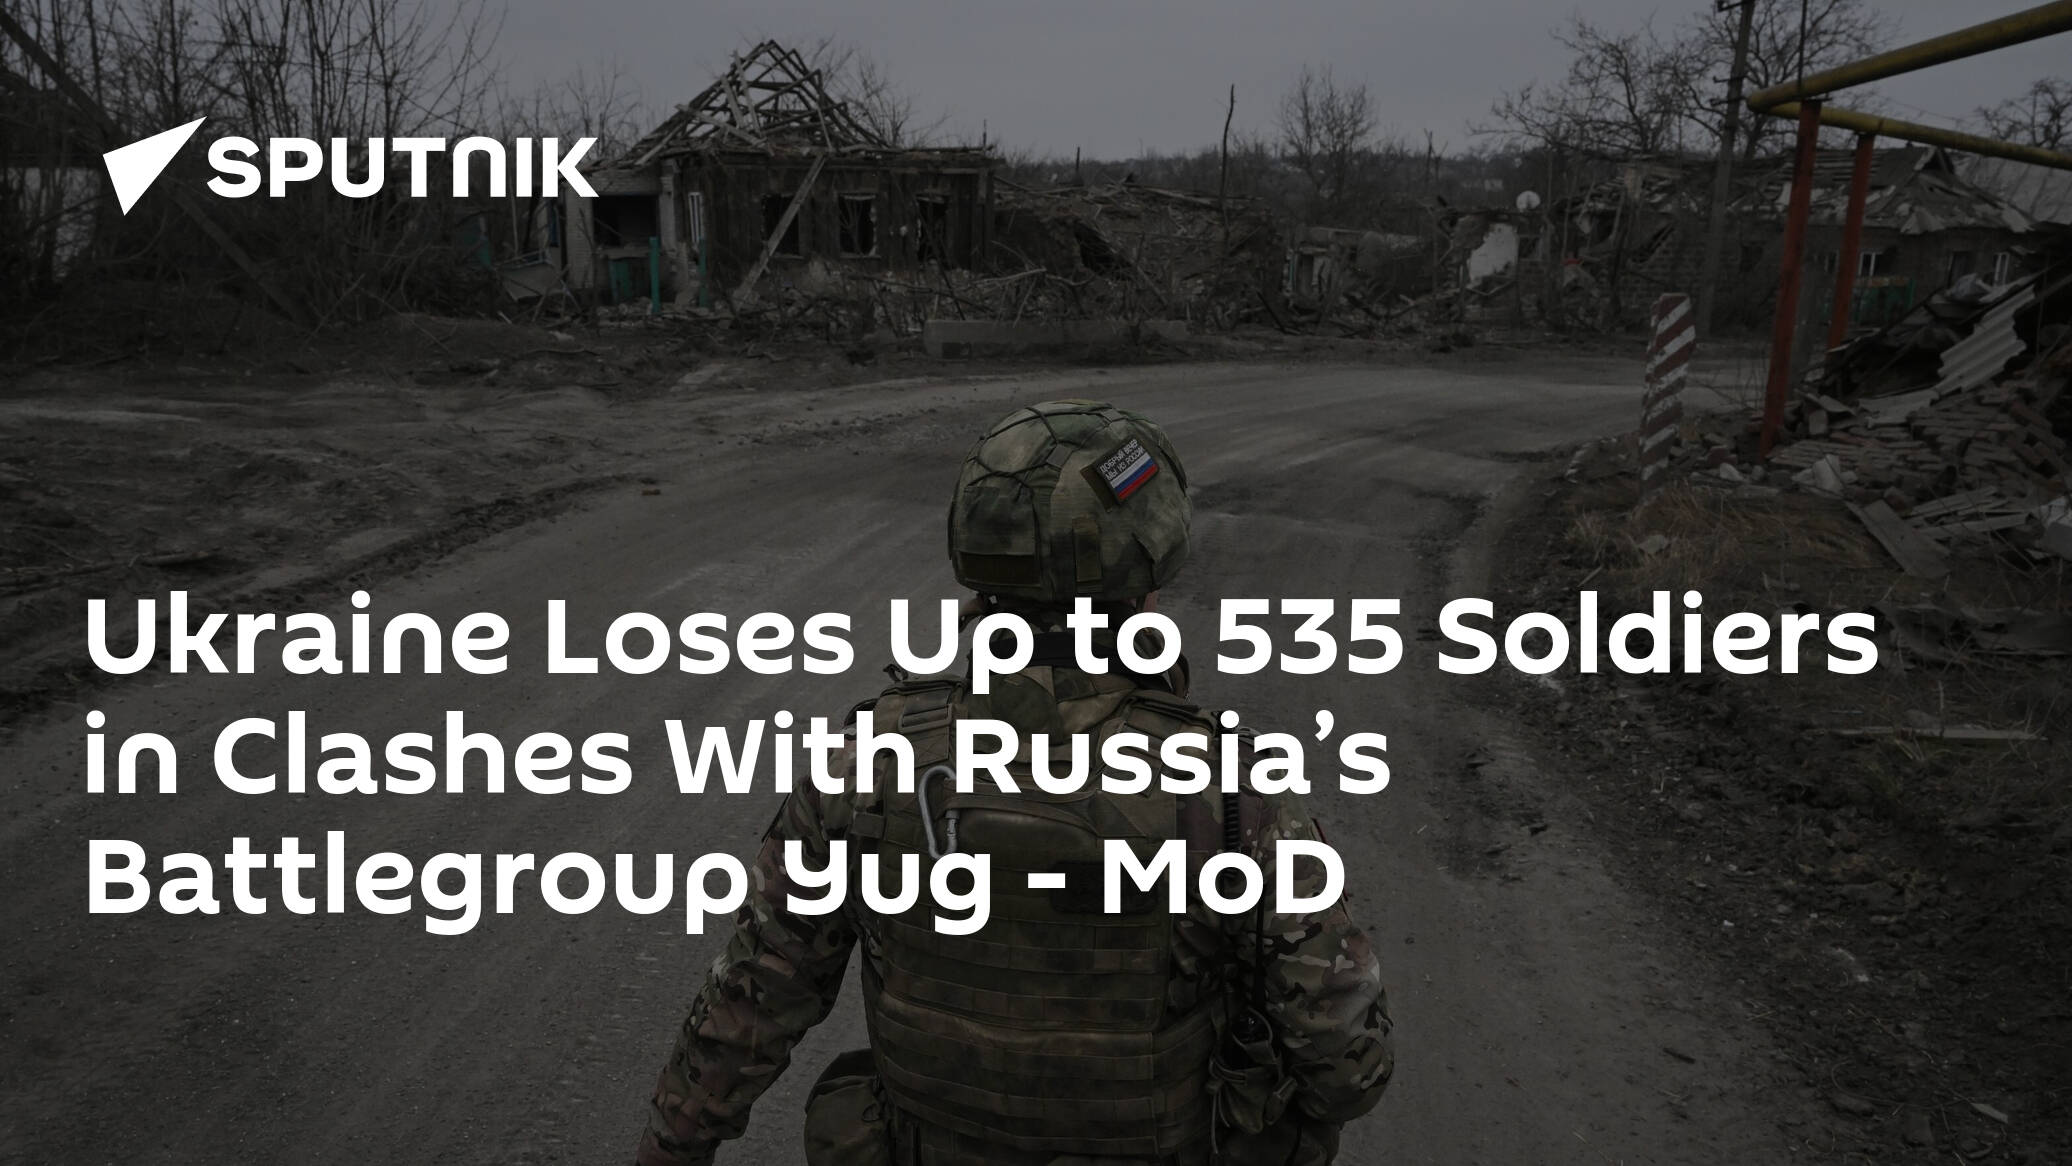 Ukraine Loses Up to 535 Soldiers in Clashes With Russia’s Battlegroup Yug – MoD